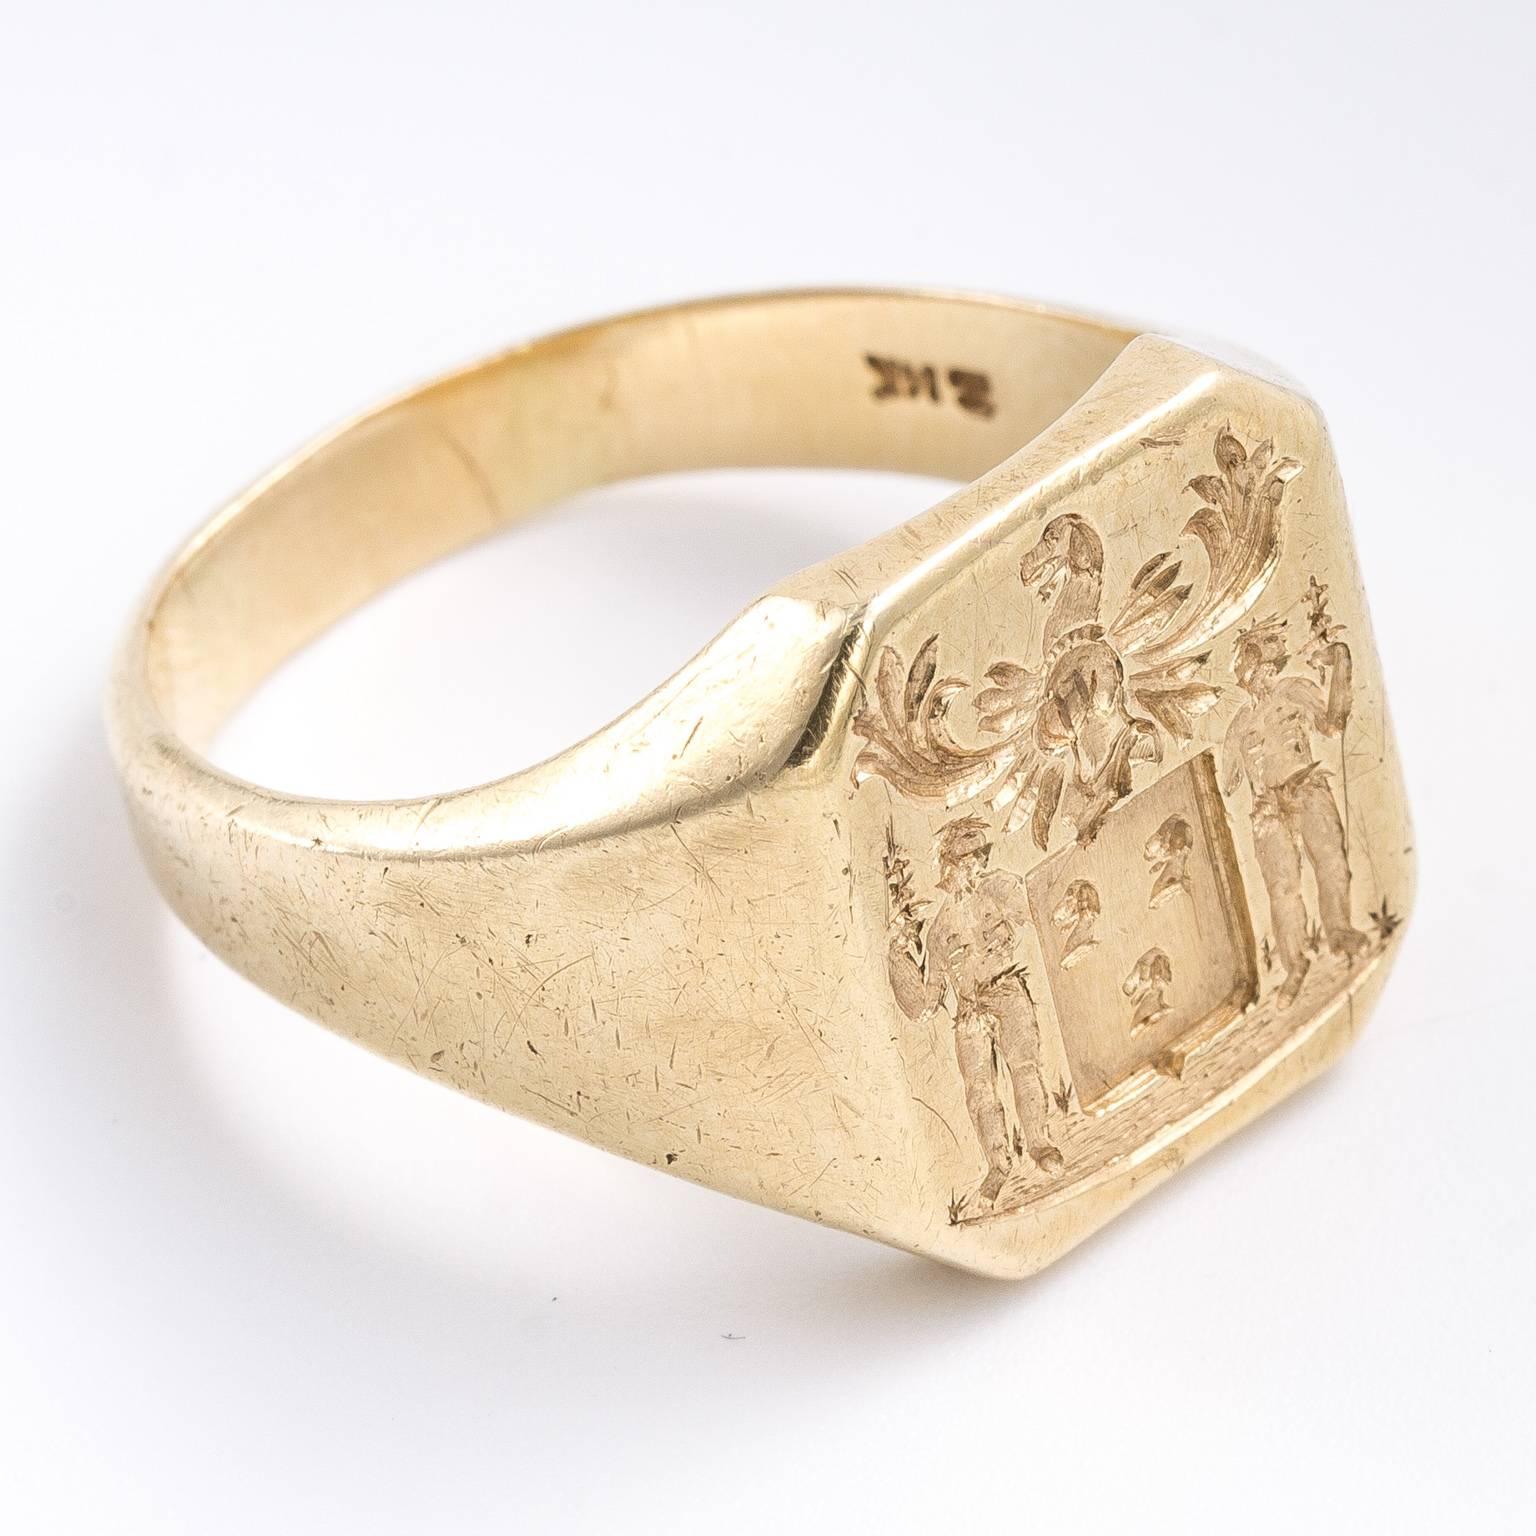 Antique 14kt signet ring with a hallmark from the United Kingdom. The intaglio of a family crest is beautifully carved. The square shape from this period is sought after. Size 10 and 12.80 grams. Signet Dimensions: 2.00 cm x 1.50 cm